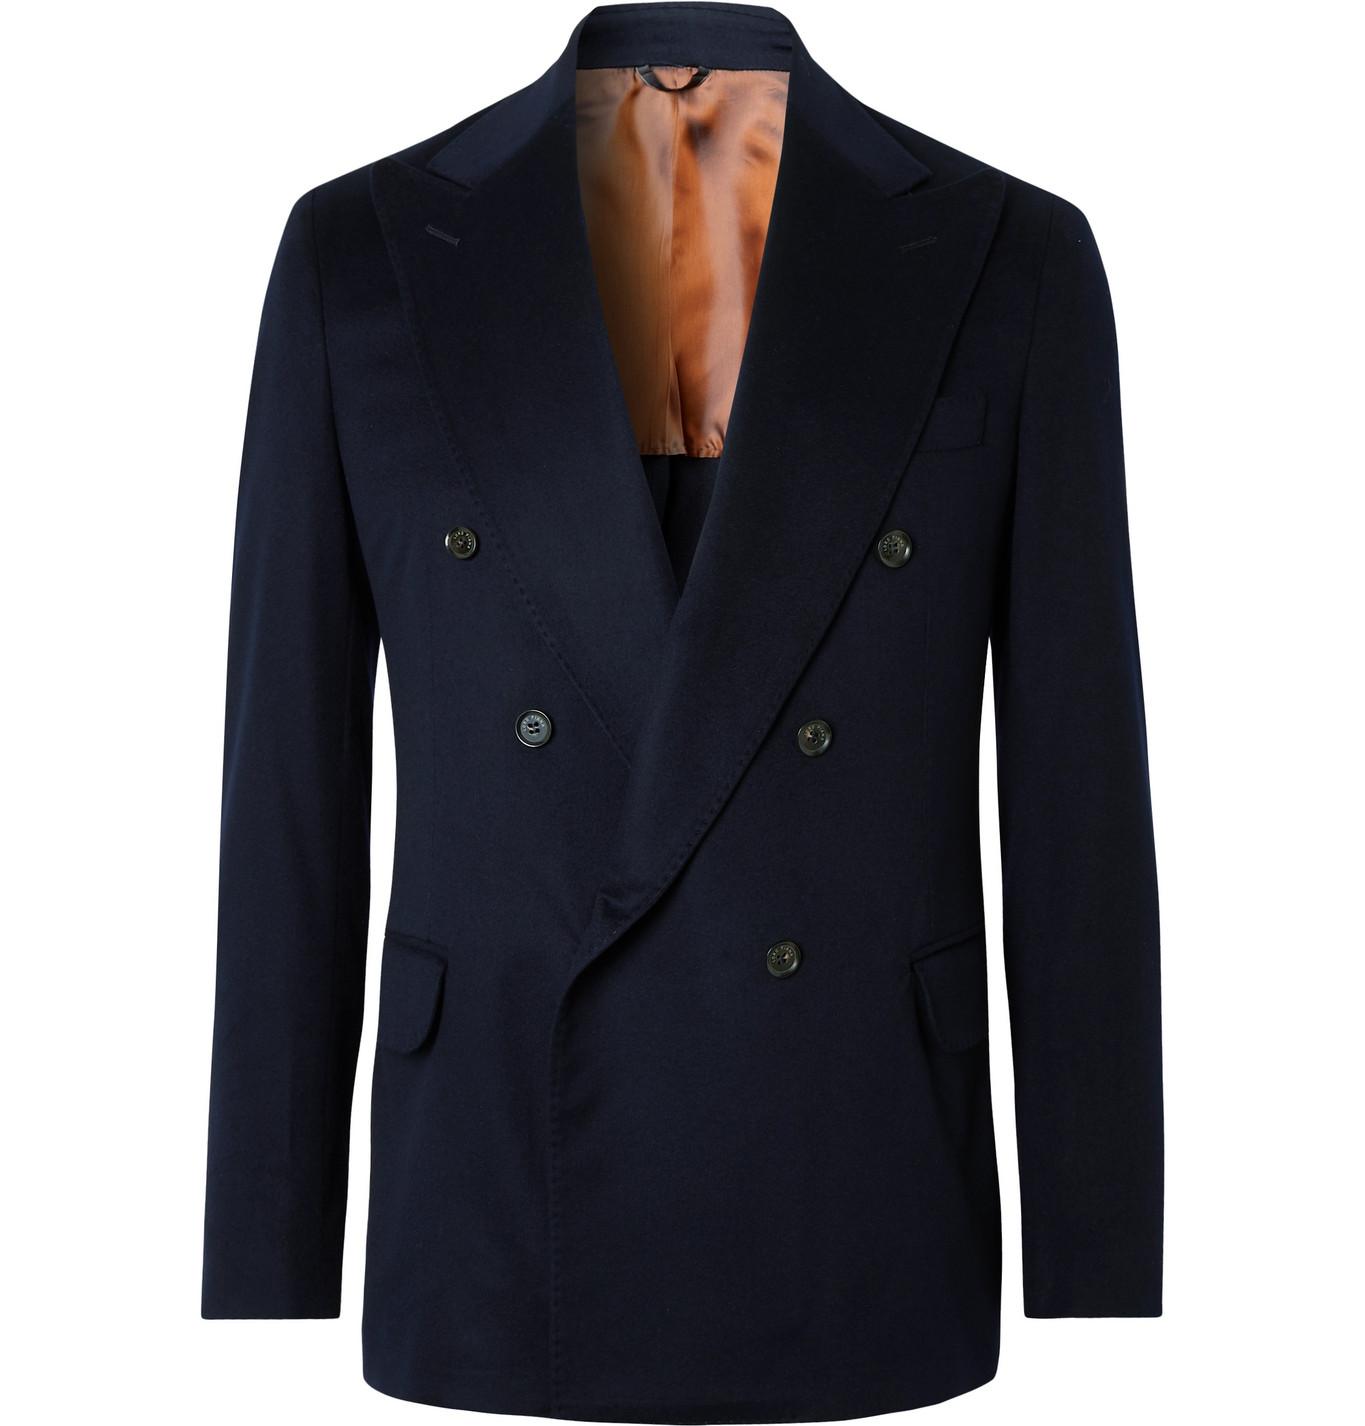 Loro Piana Double-breasted Cashmere Blazer in Blue for Men - Lyst